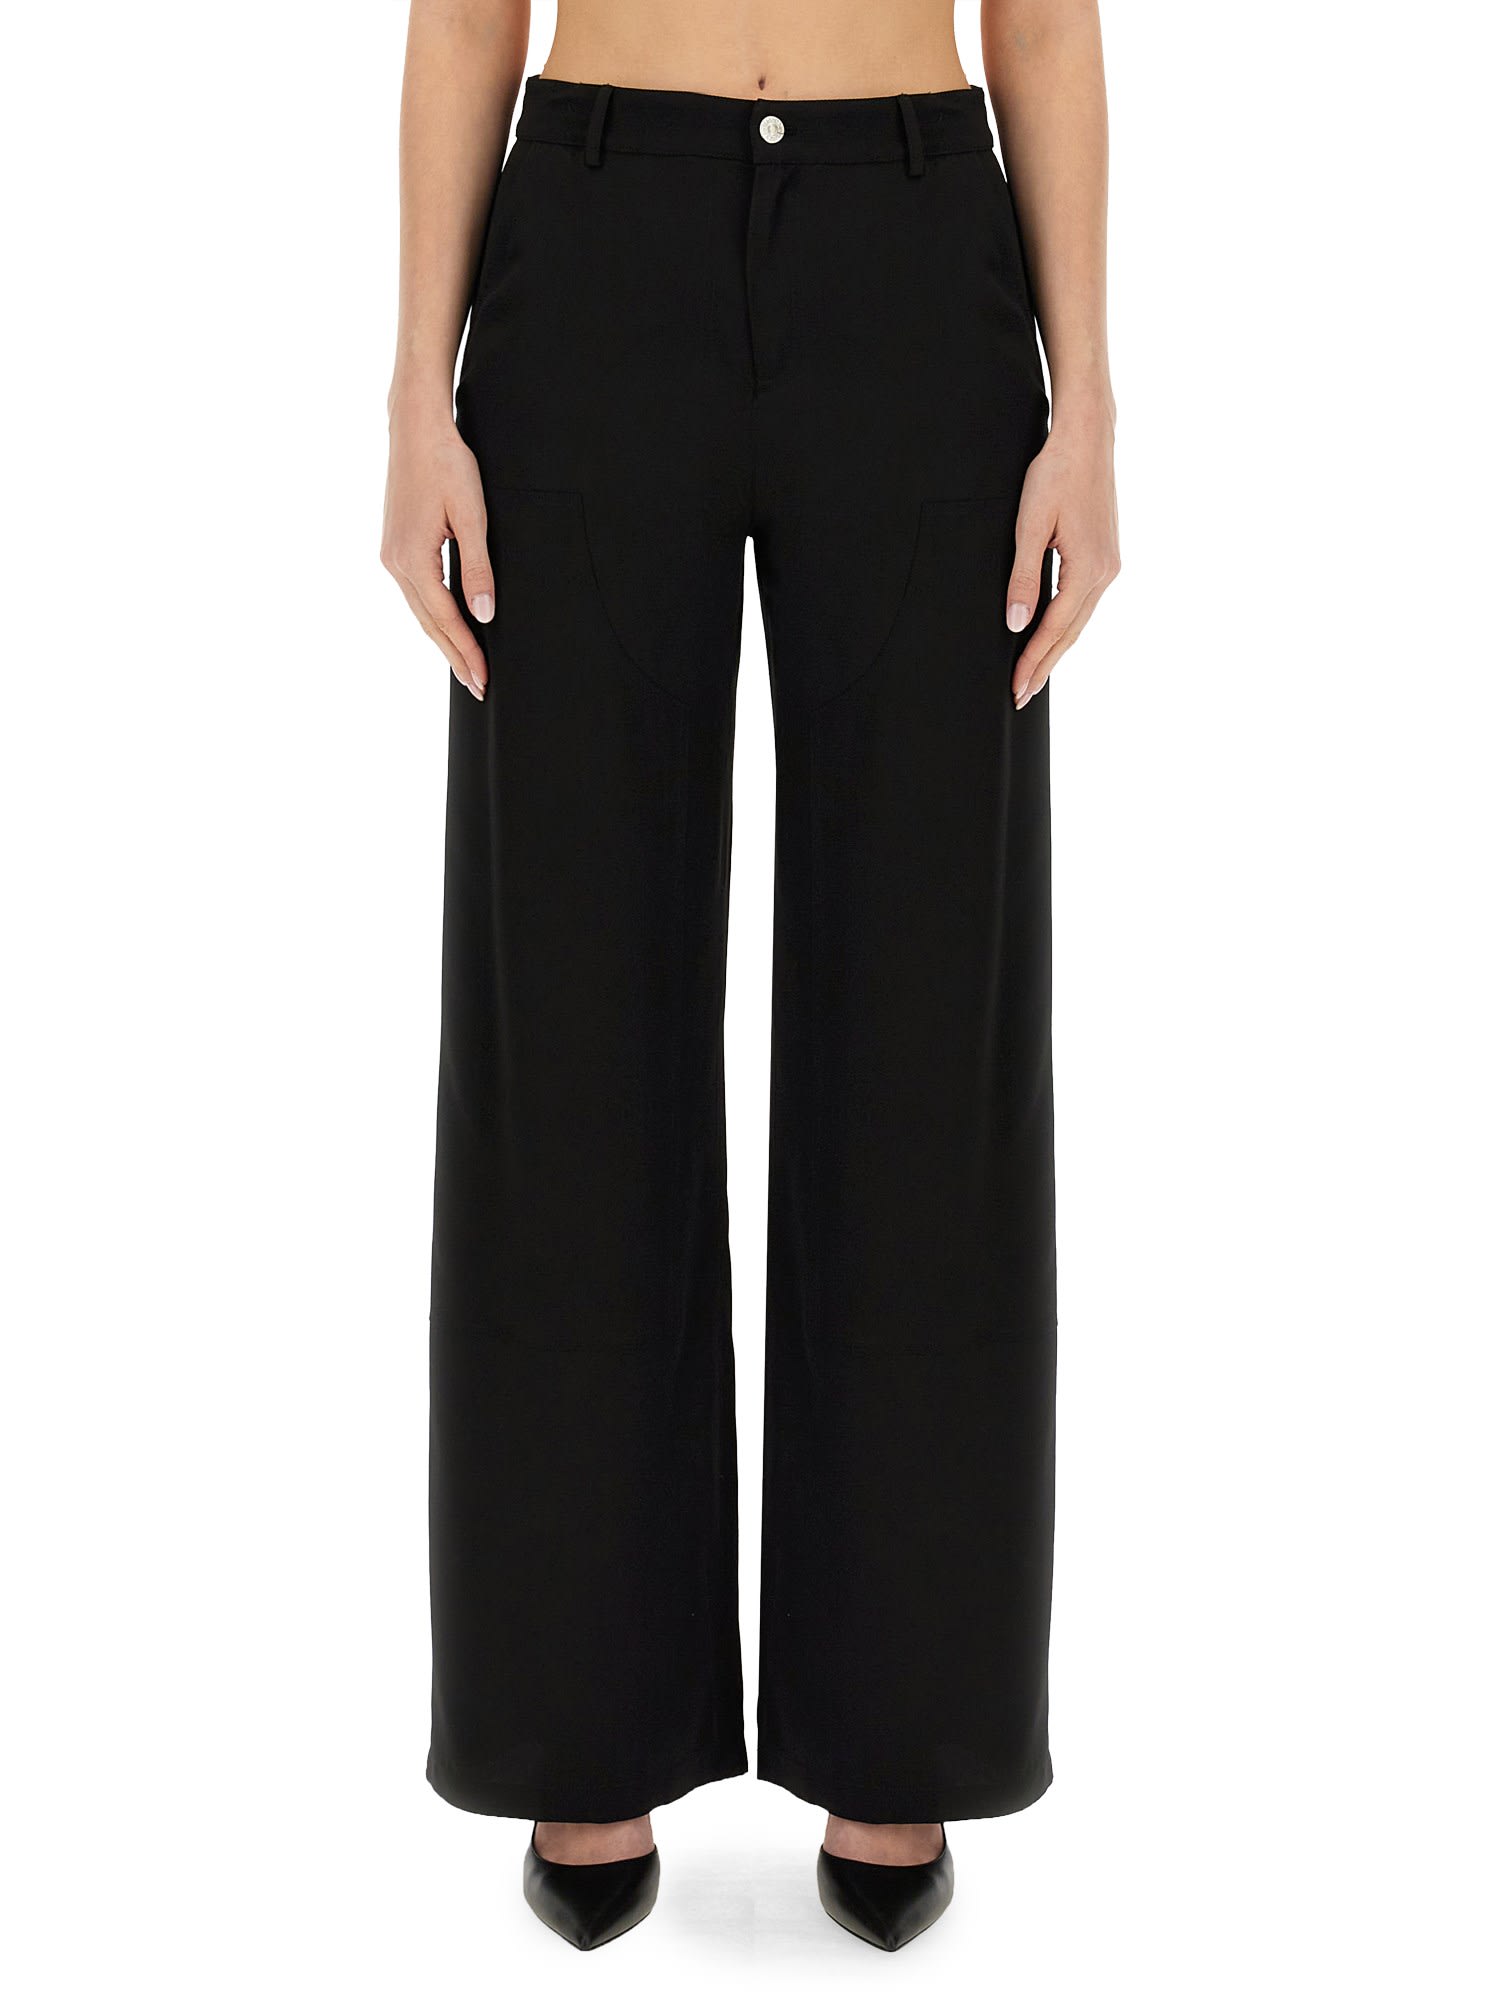 M05CH1N0 JEANS PALAZZO trousers